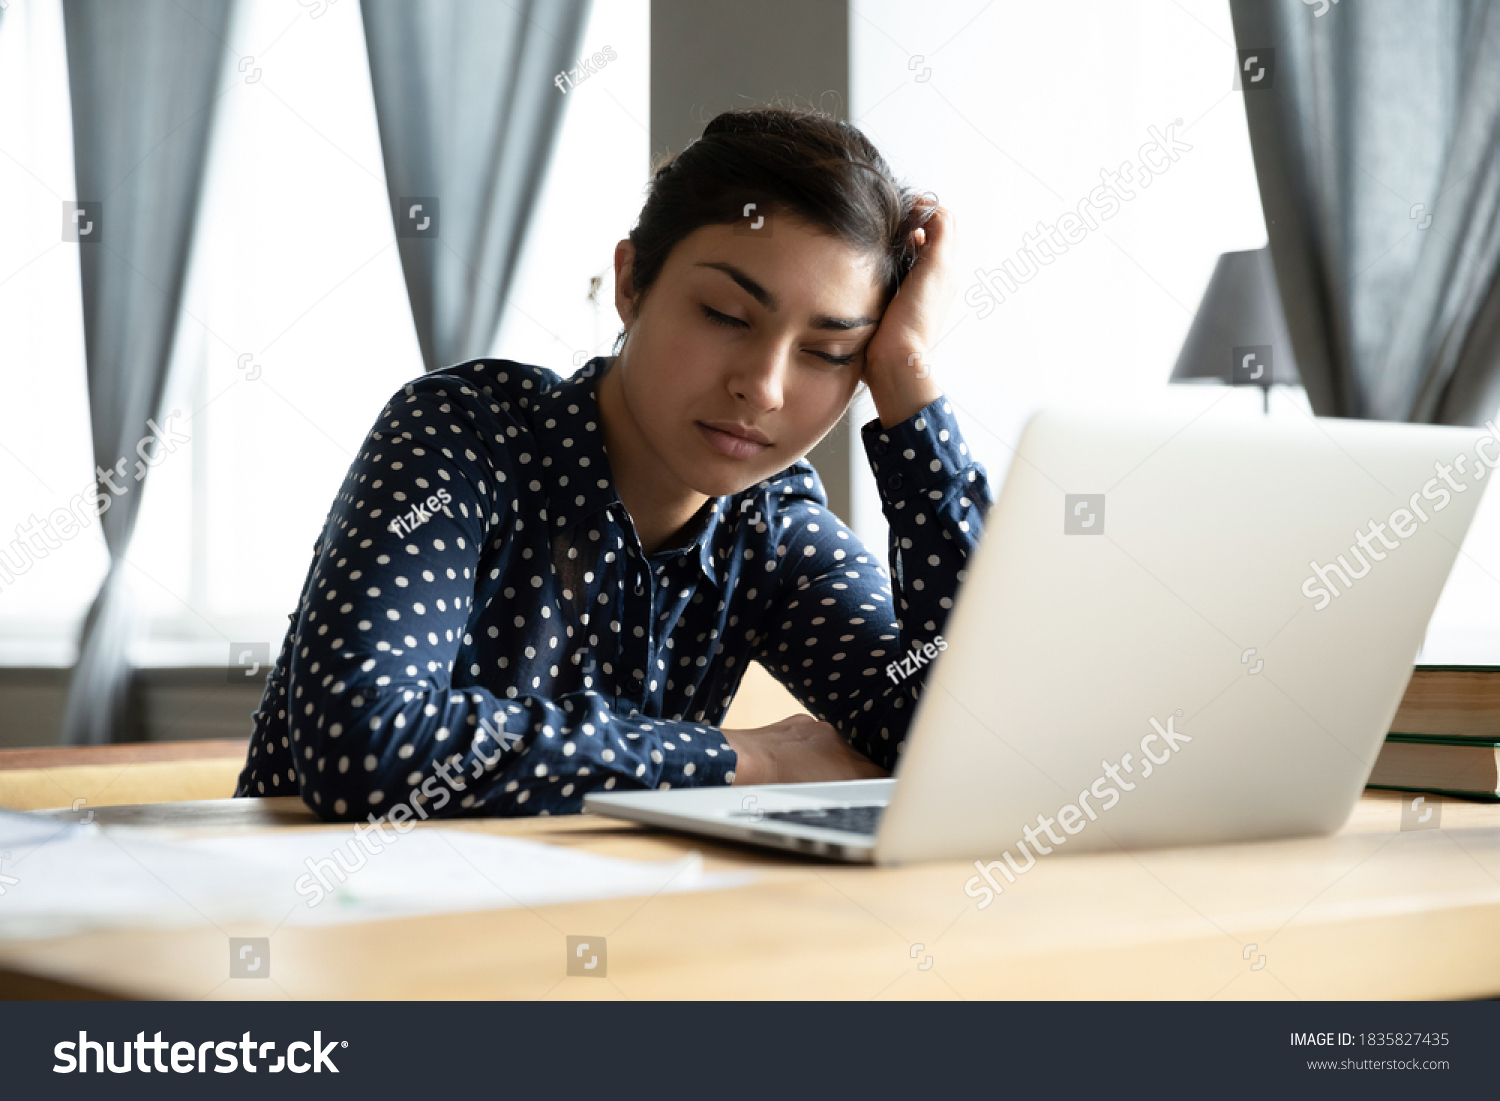 Sleepy indian ethnicity businesswoman fall asleep seated at workplace desk near laptop. Boring job and lack of sleep, unmotivated employee feels disinterested, overworked woman stressful work concept #1835827435